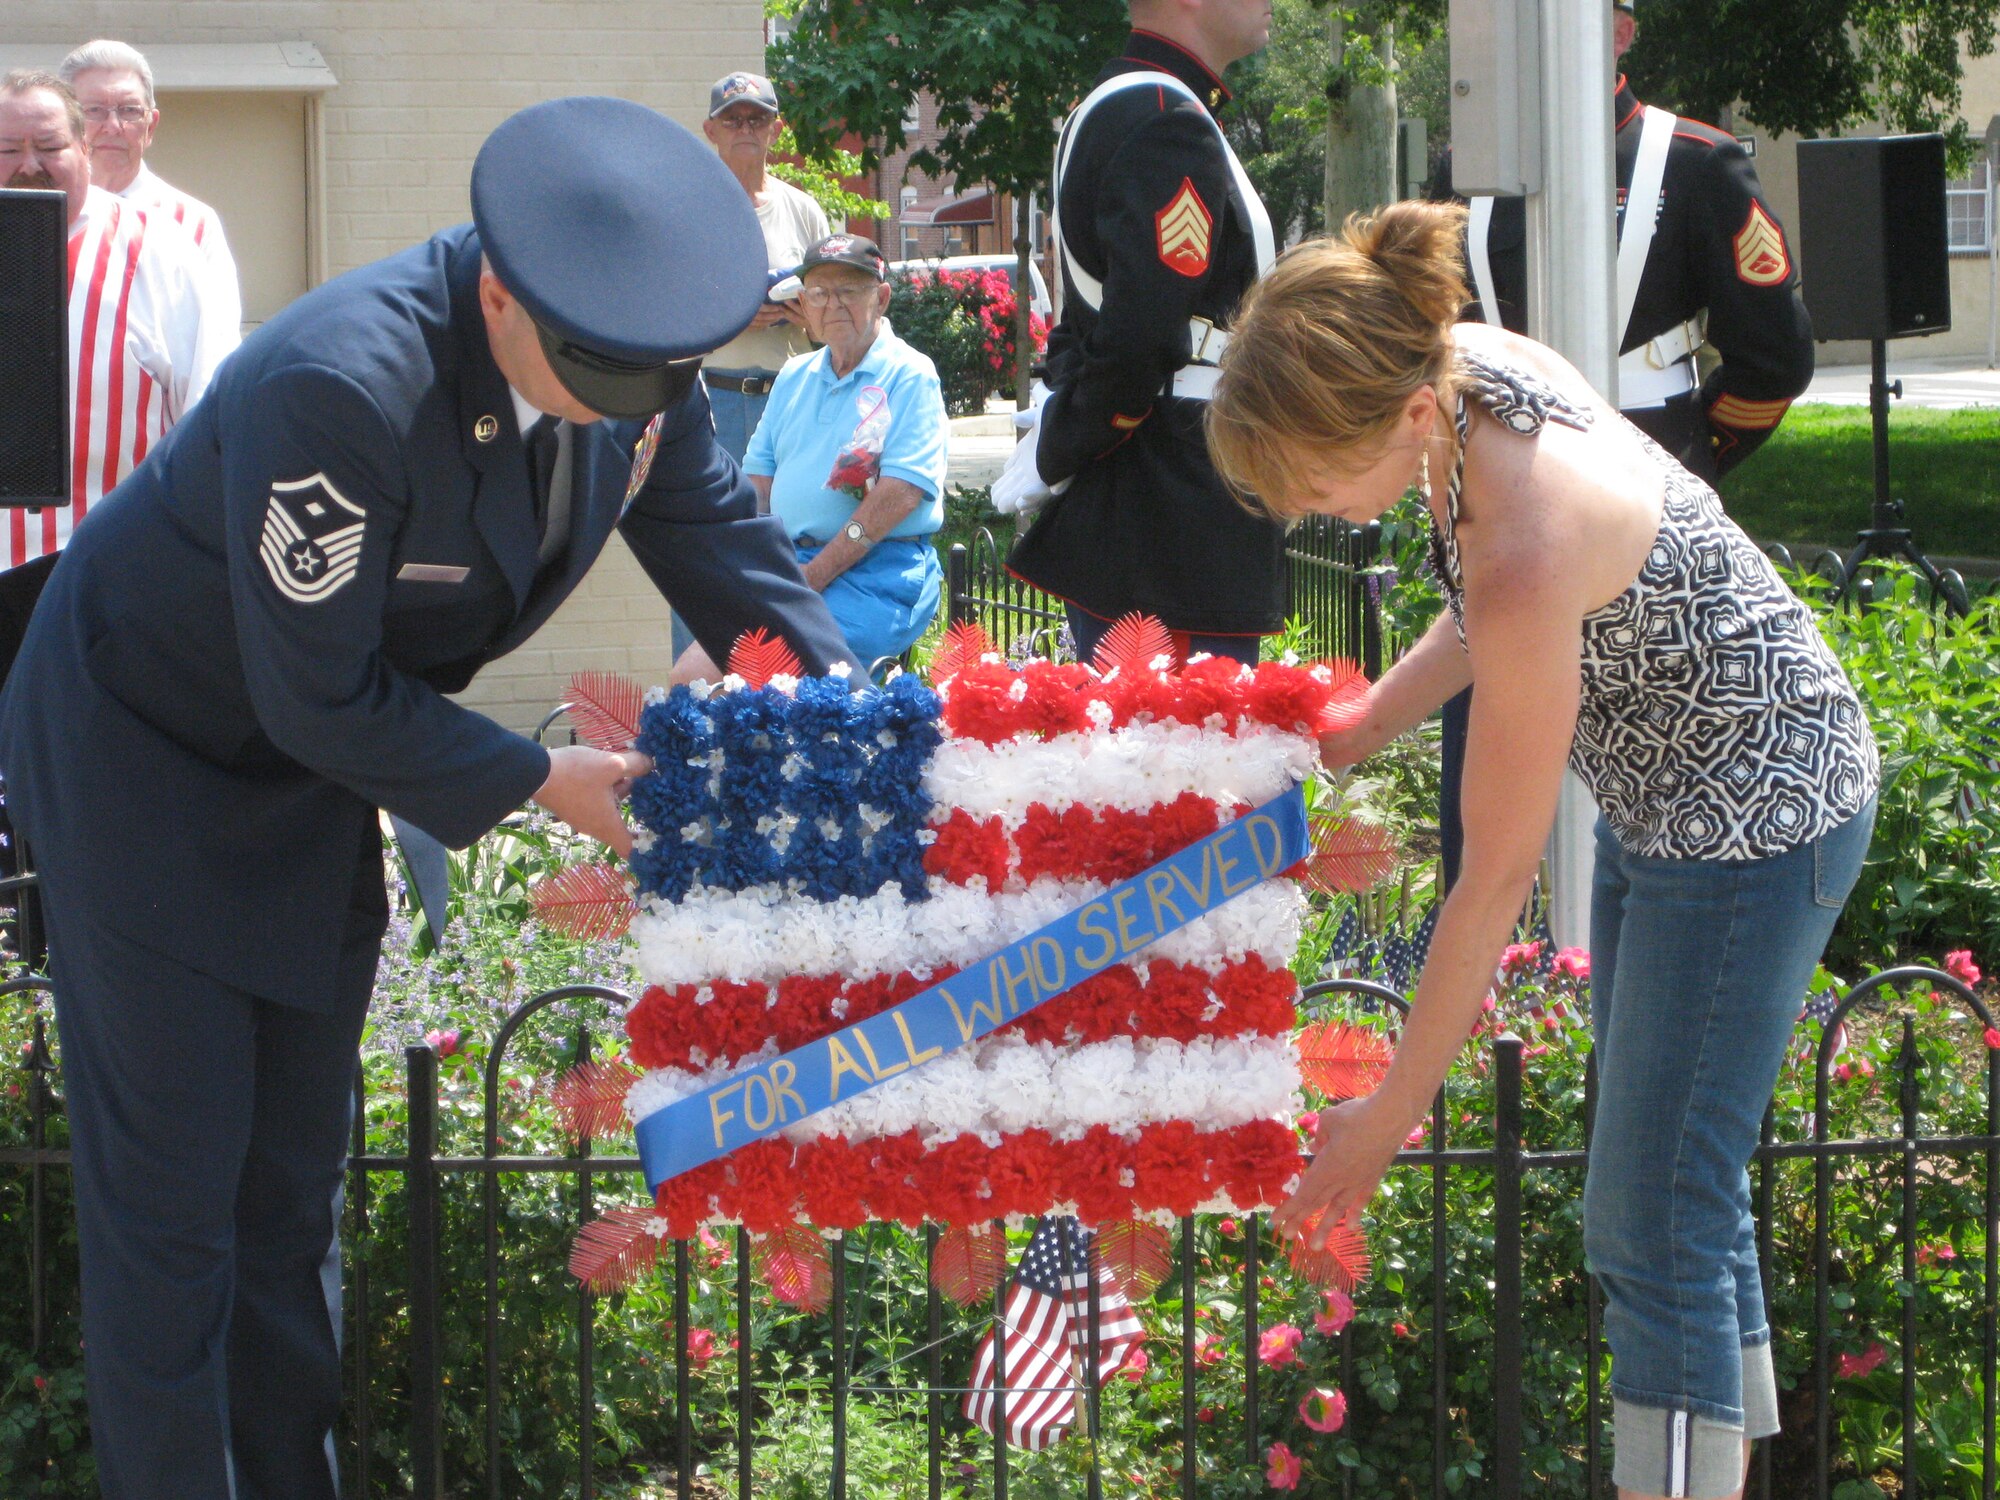 Master Sgt. Walter J. Milewski, first sergeant of the 201st RED HORSE Sq. Det. 1, Willow Grove Air Reserve Stations, Pa. and wife Janice lay a wreath at the Port Richmond Memorial Day Parade in Philadelphia May 25.  Milewski served as Grand Marshall of the parade this year.